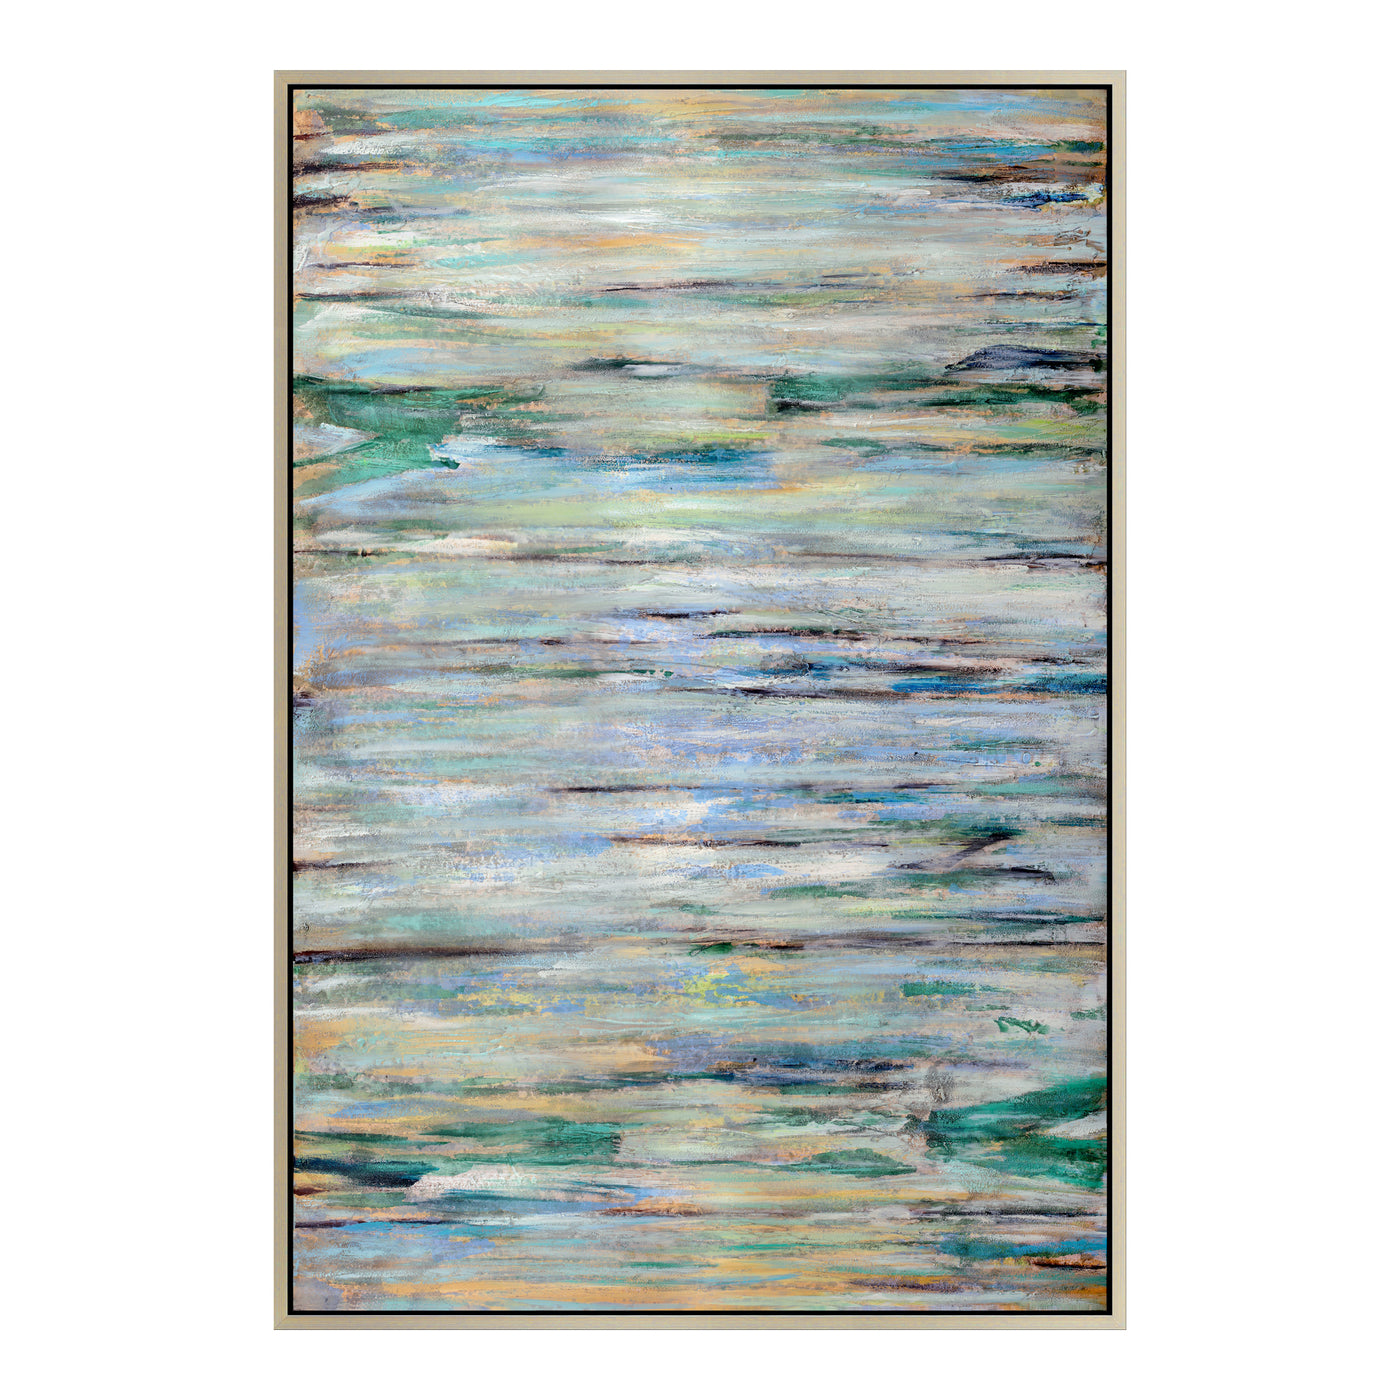 This artwork's organic, earthy greens and faded blues look like the top of a serene pool. This abstract image will fit sea...